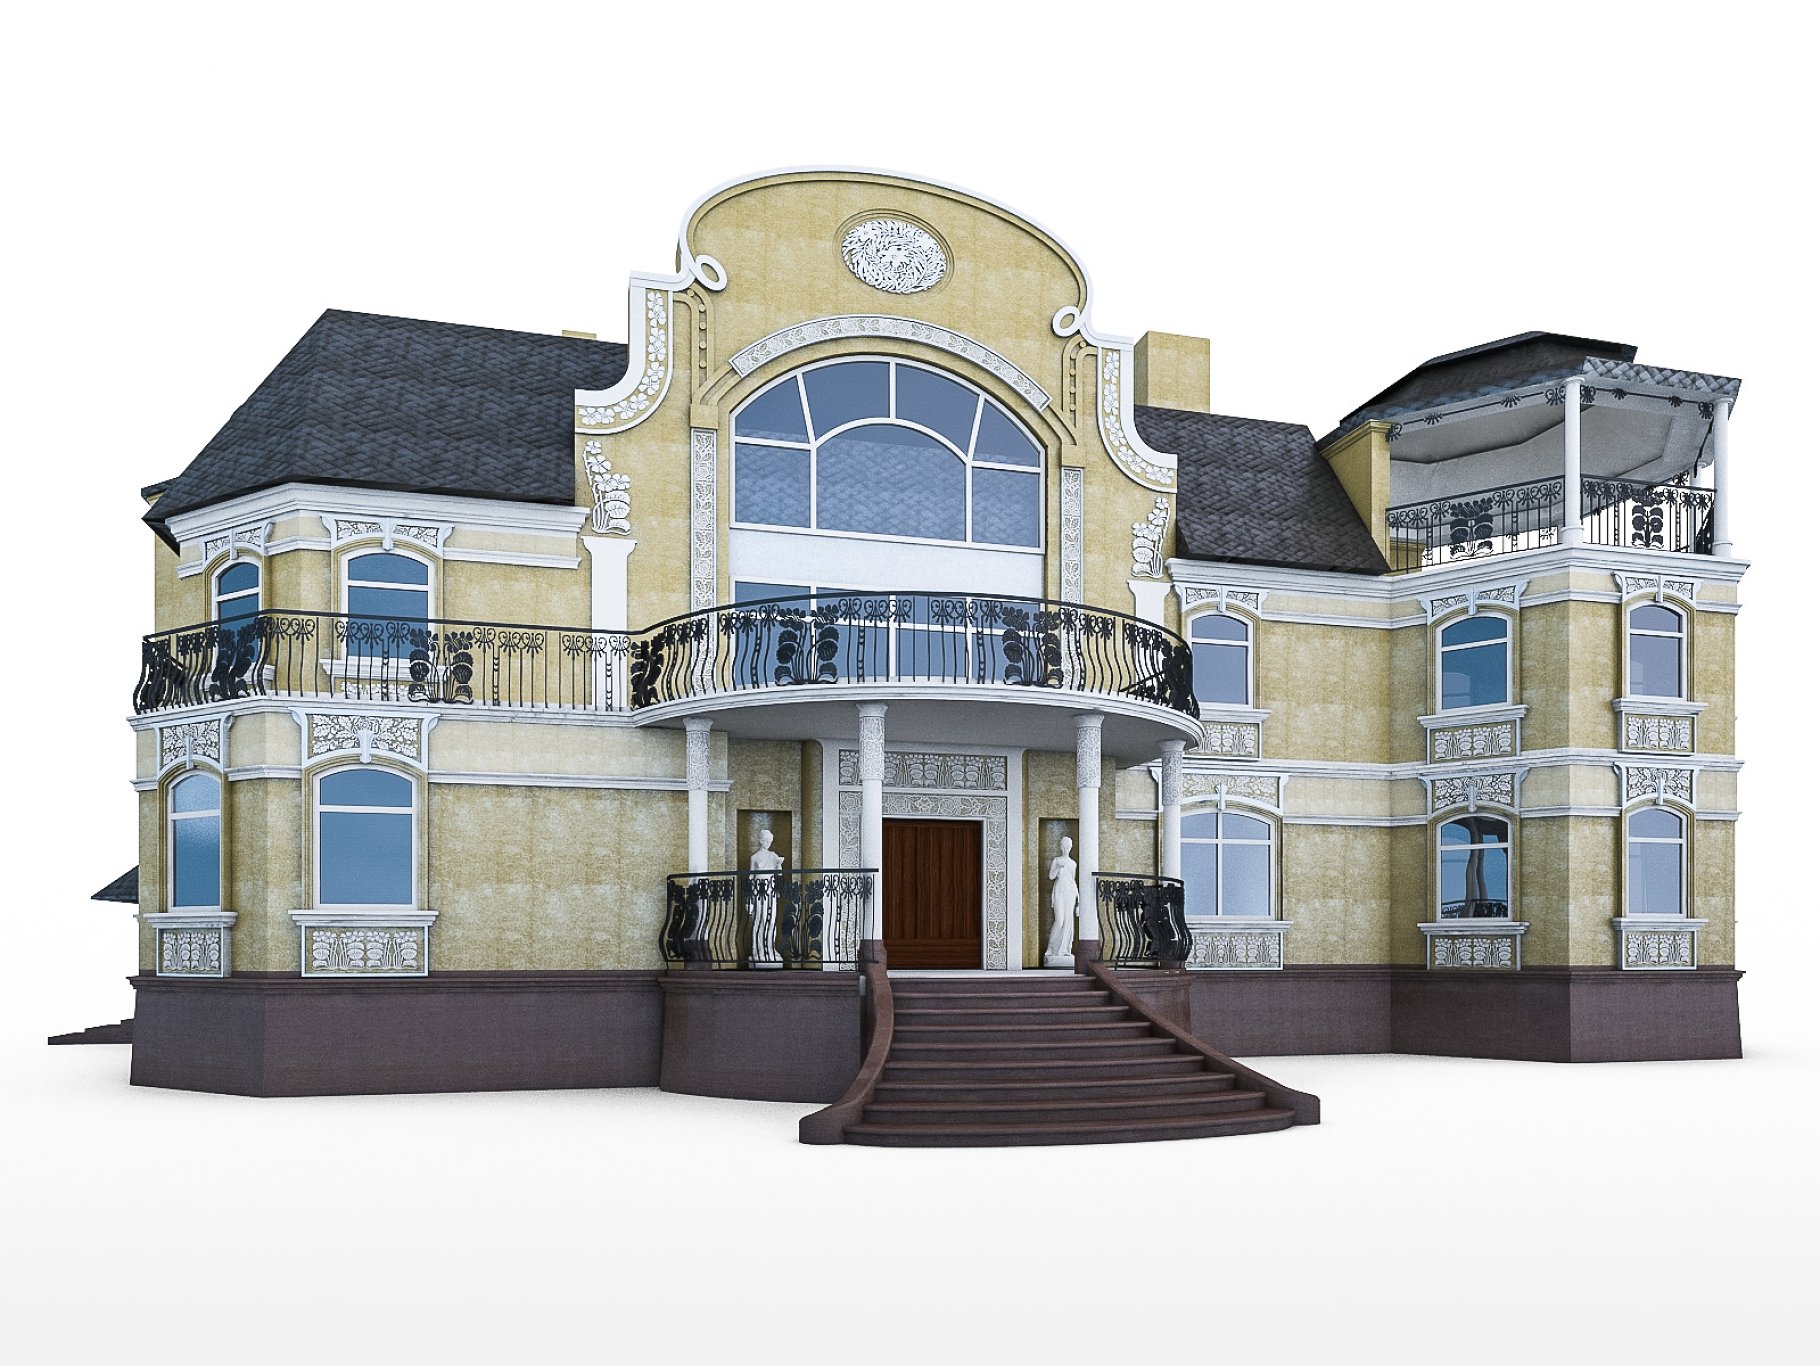 Image of the building render.